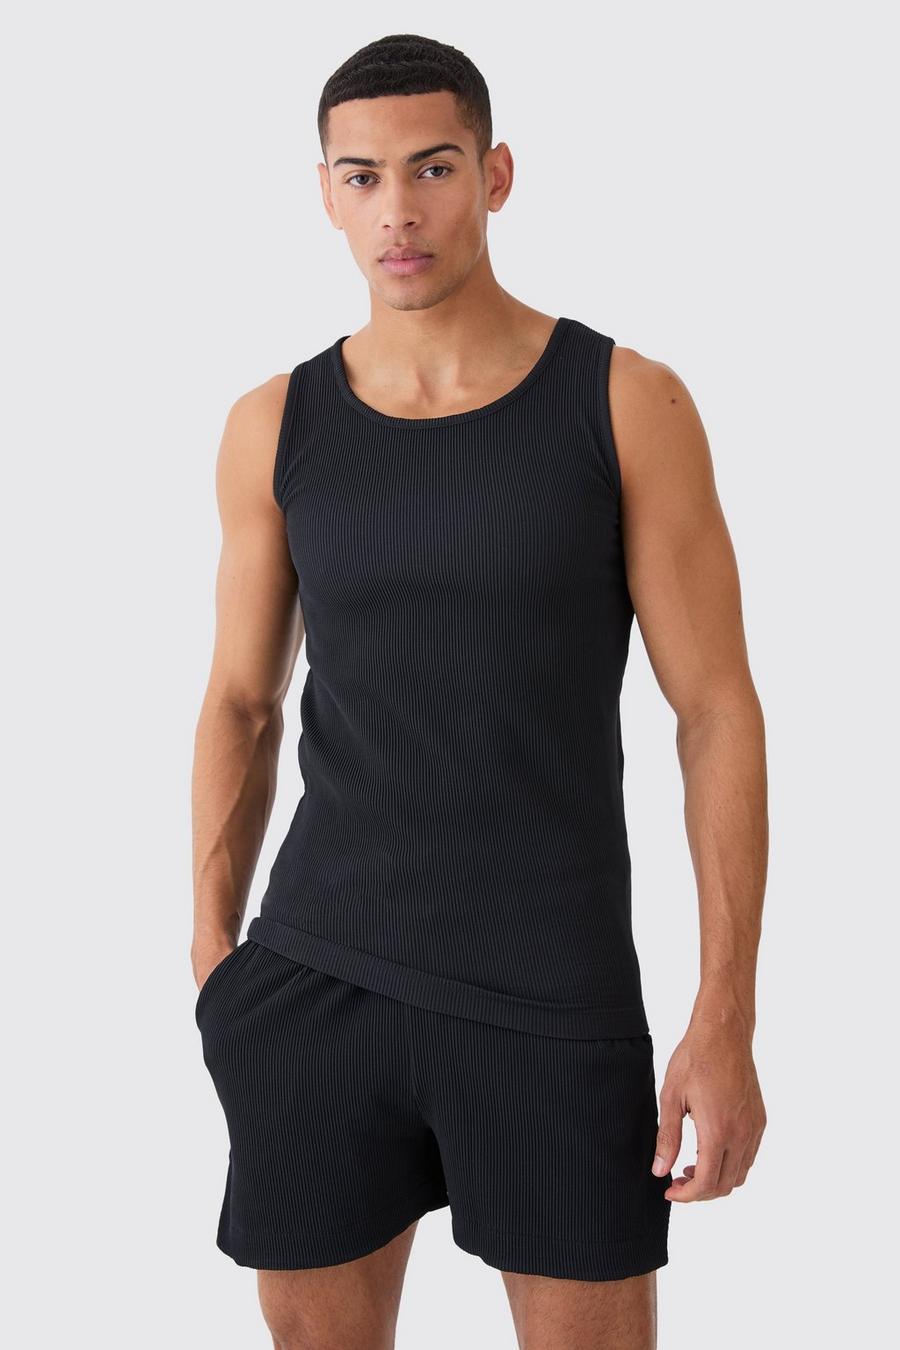 Black Pleated Muscle Vest And Runner Short image number 1